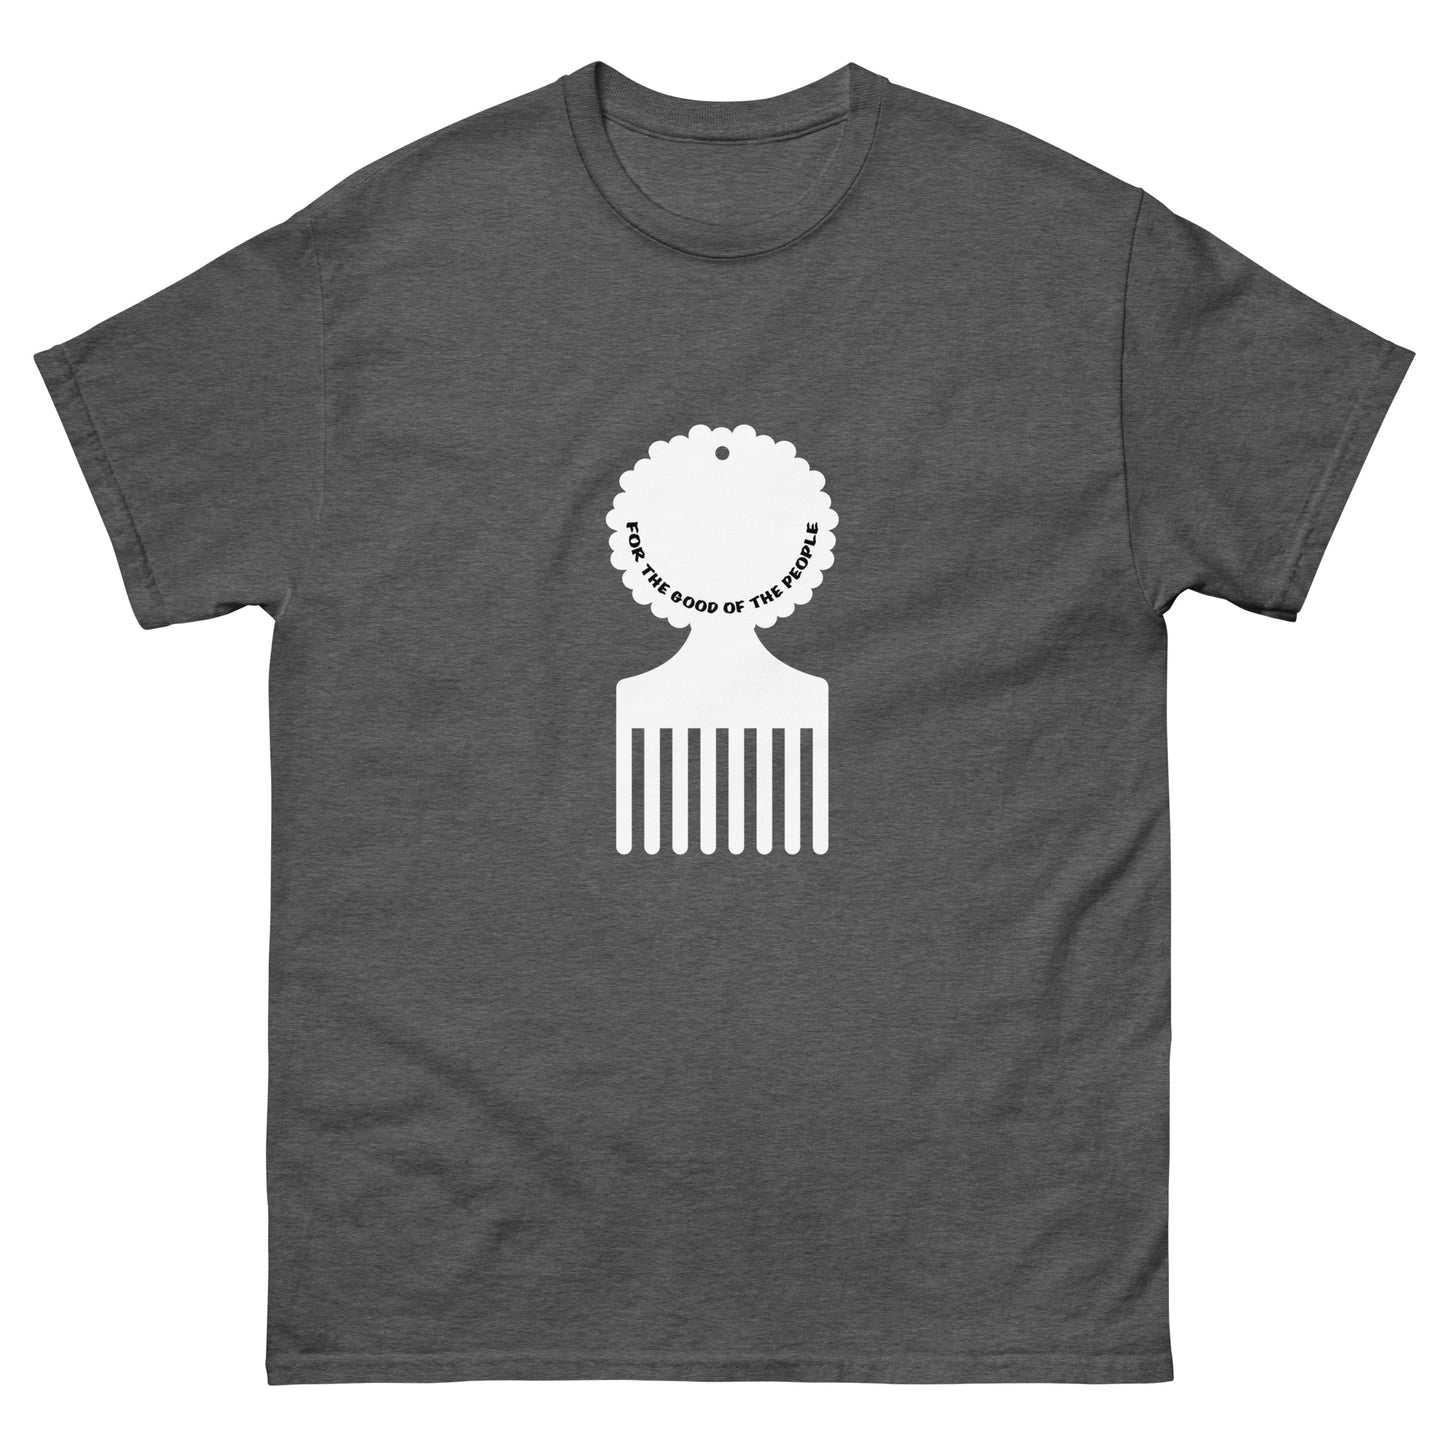 Men's dark heather gray tee with white afro pick in the center of shirt, with for the good of the people in white inside the afro pick's handle.